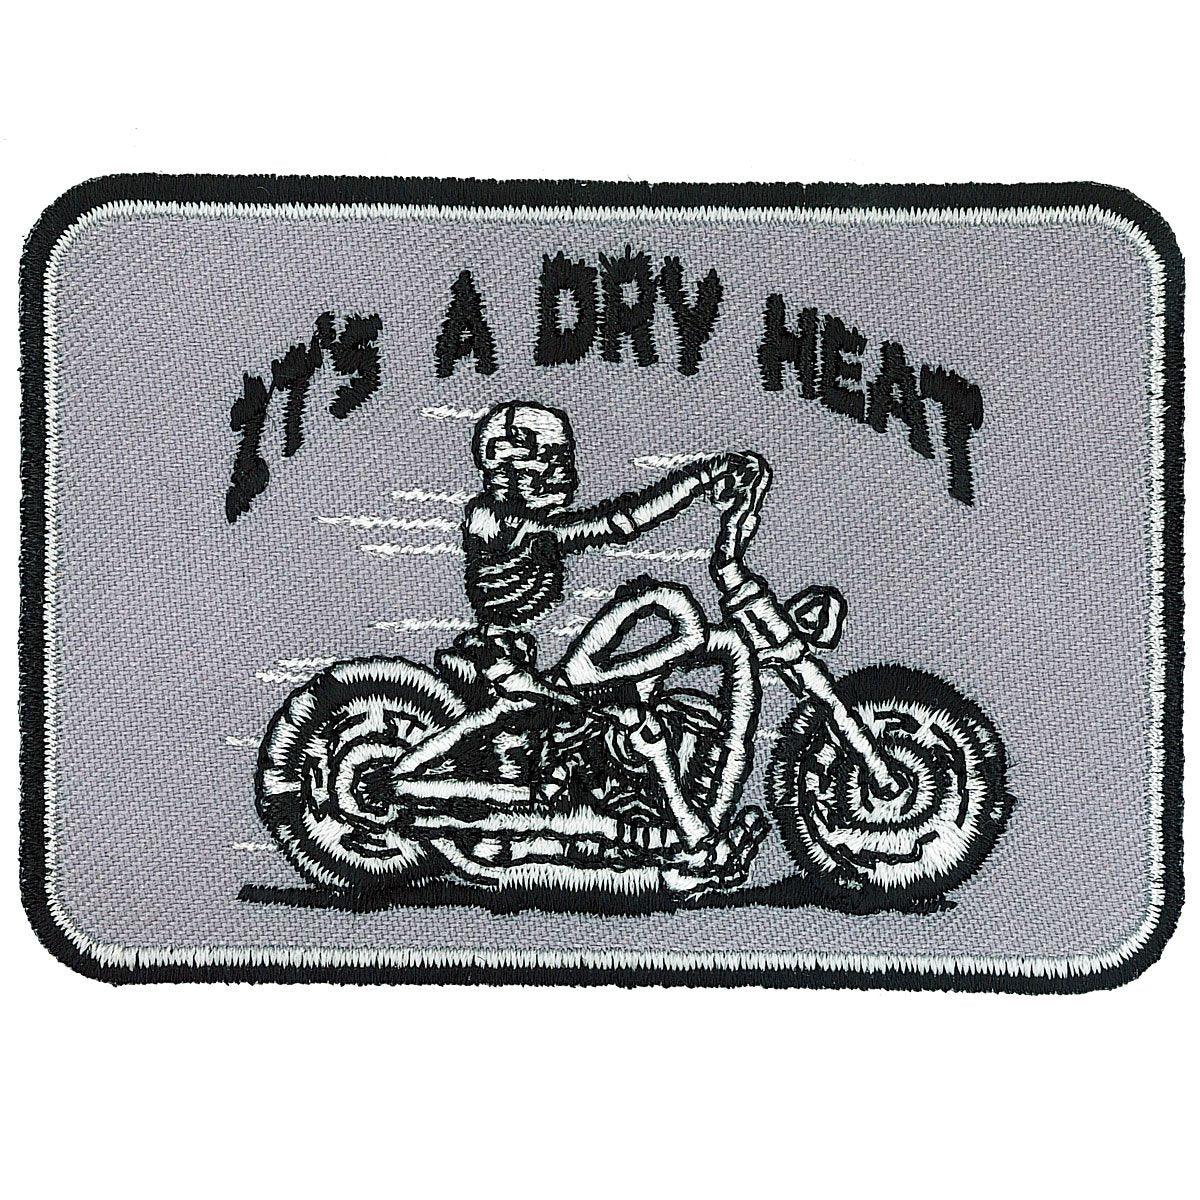 Hot Leathers Skeleton Bike 4" X 3" Patch - American Legend Rider